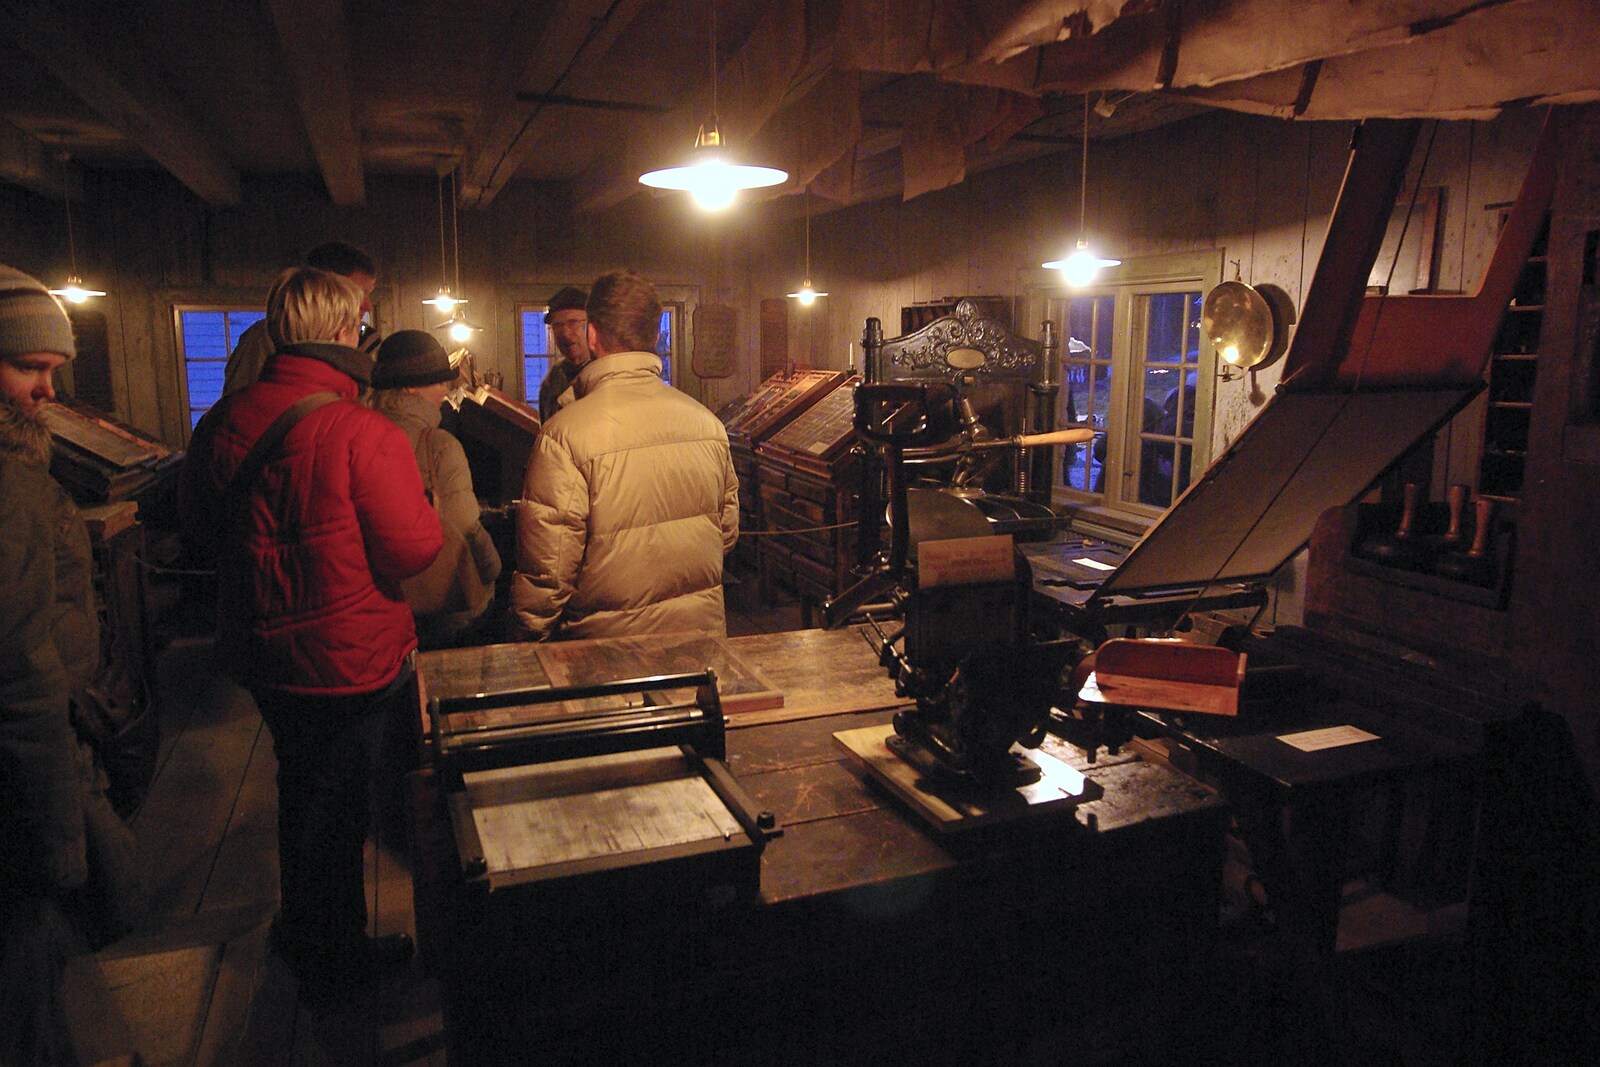 In a printing workshop from A Few Hours in Skansen, Stockholm, Sweden - 17th December 2007